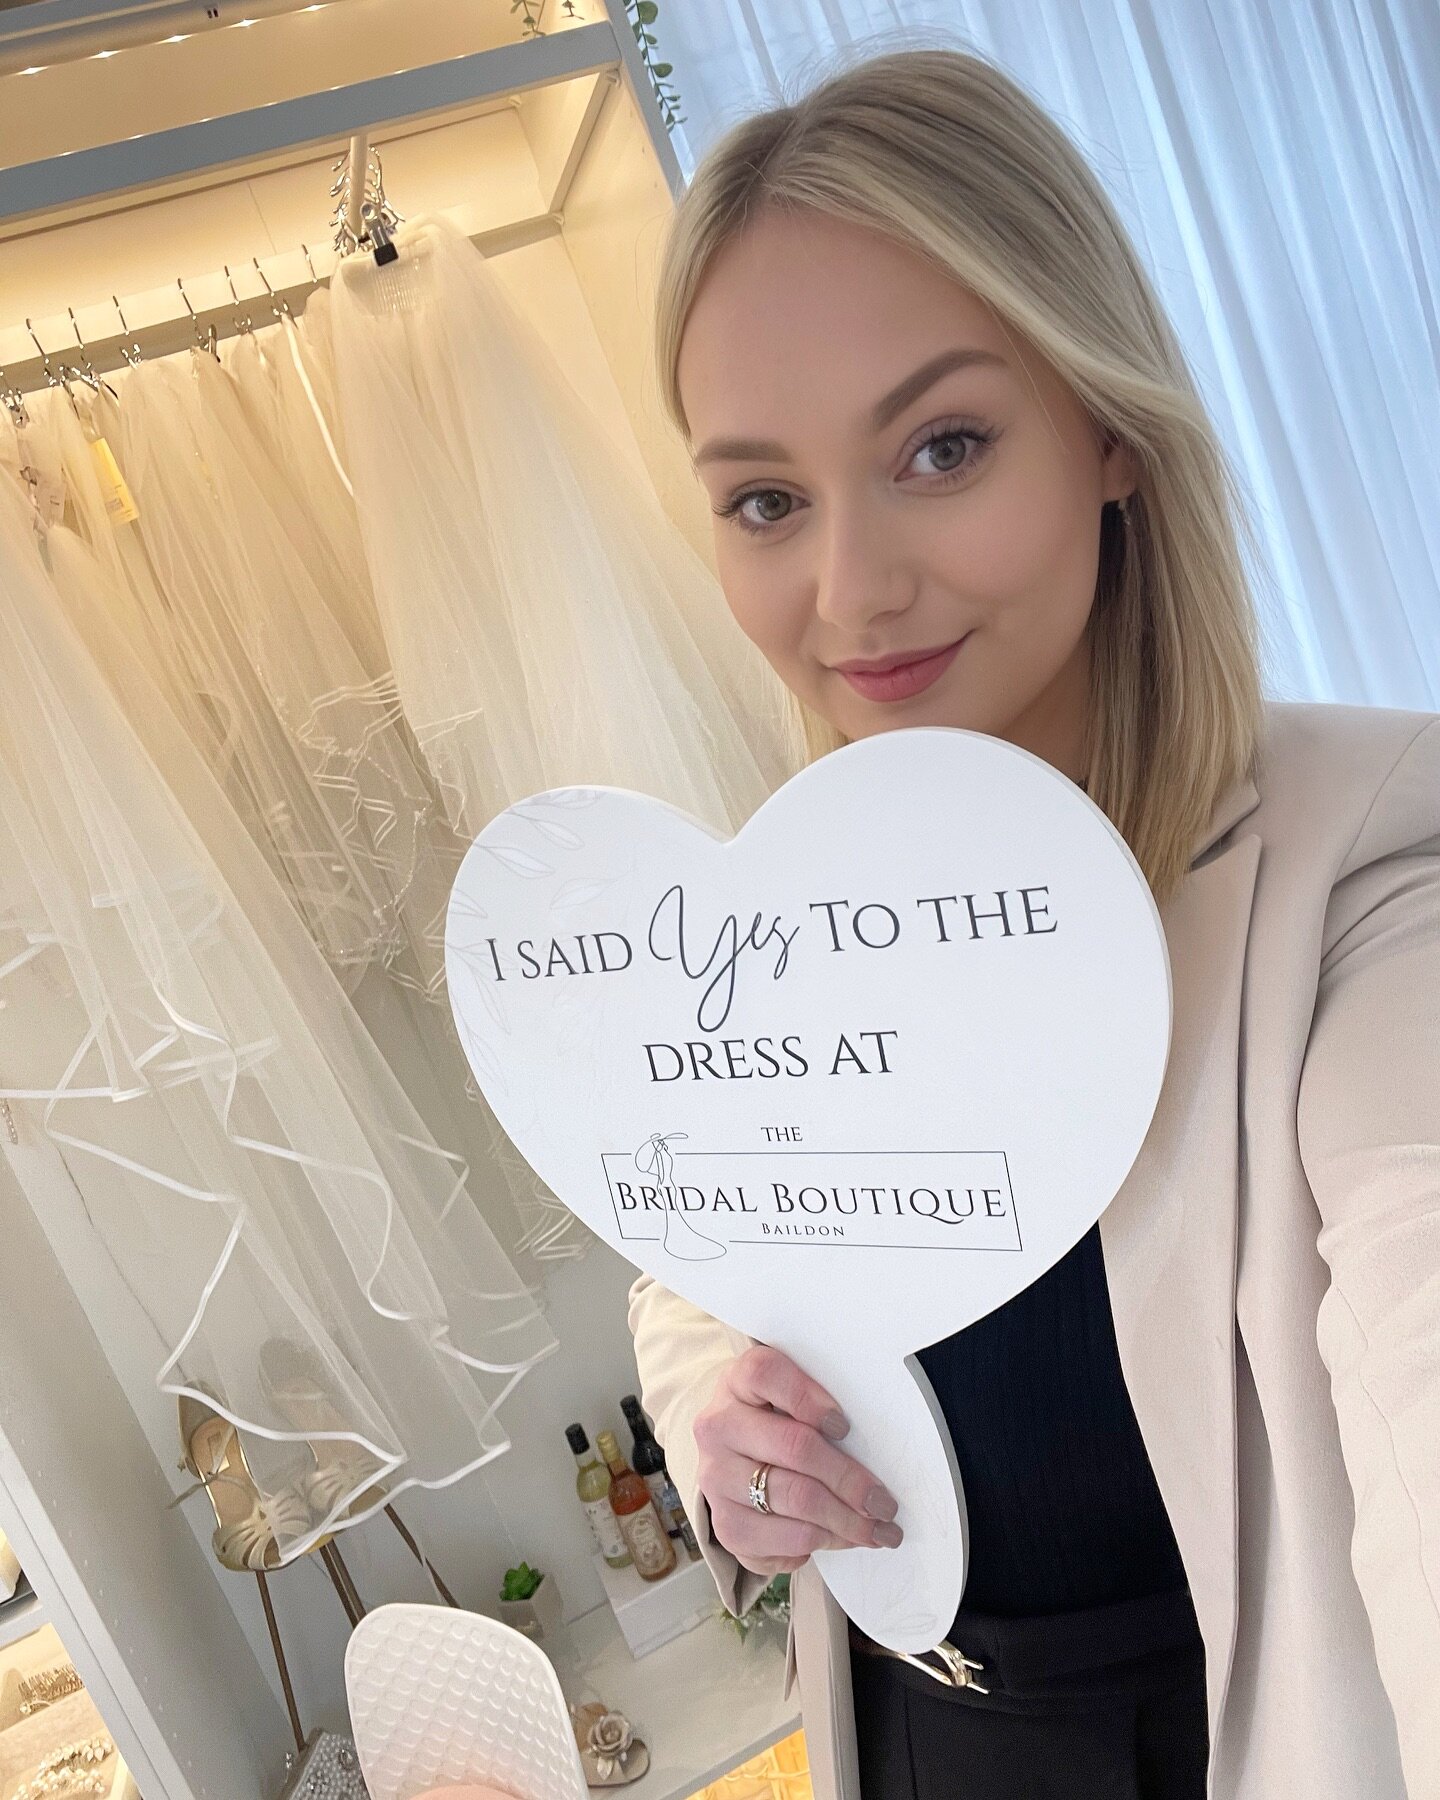 🤍 Exciting News, Brides! 🤍

Our beloved Thackley branch is currently getting a fabulous makeover to ensure it's the perfect bridal boutique for you. 

While we're busy adding some extra sparkle and shine, we won't leave you hanging. All appointment